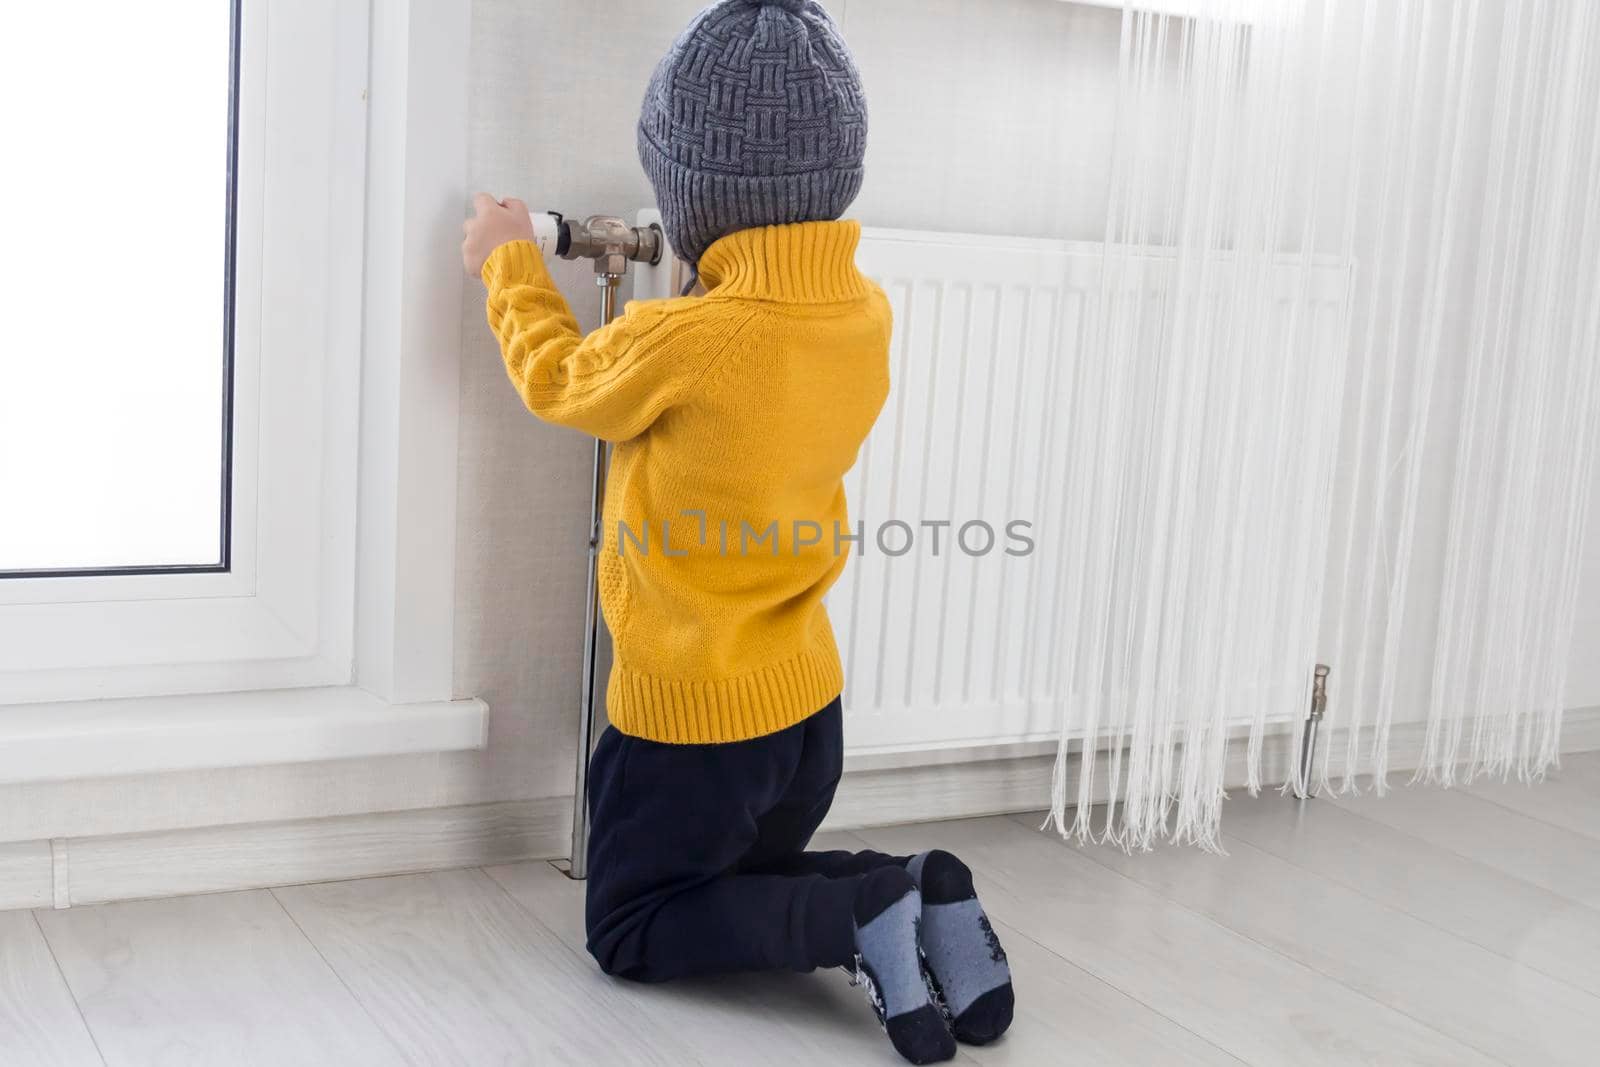 A small child in a yellow sweater and a gray hat is kneeling near a heater with a thermostat...